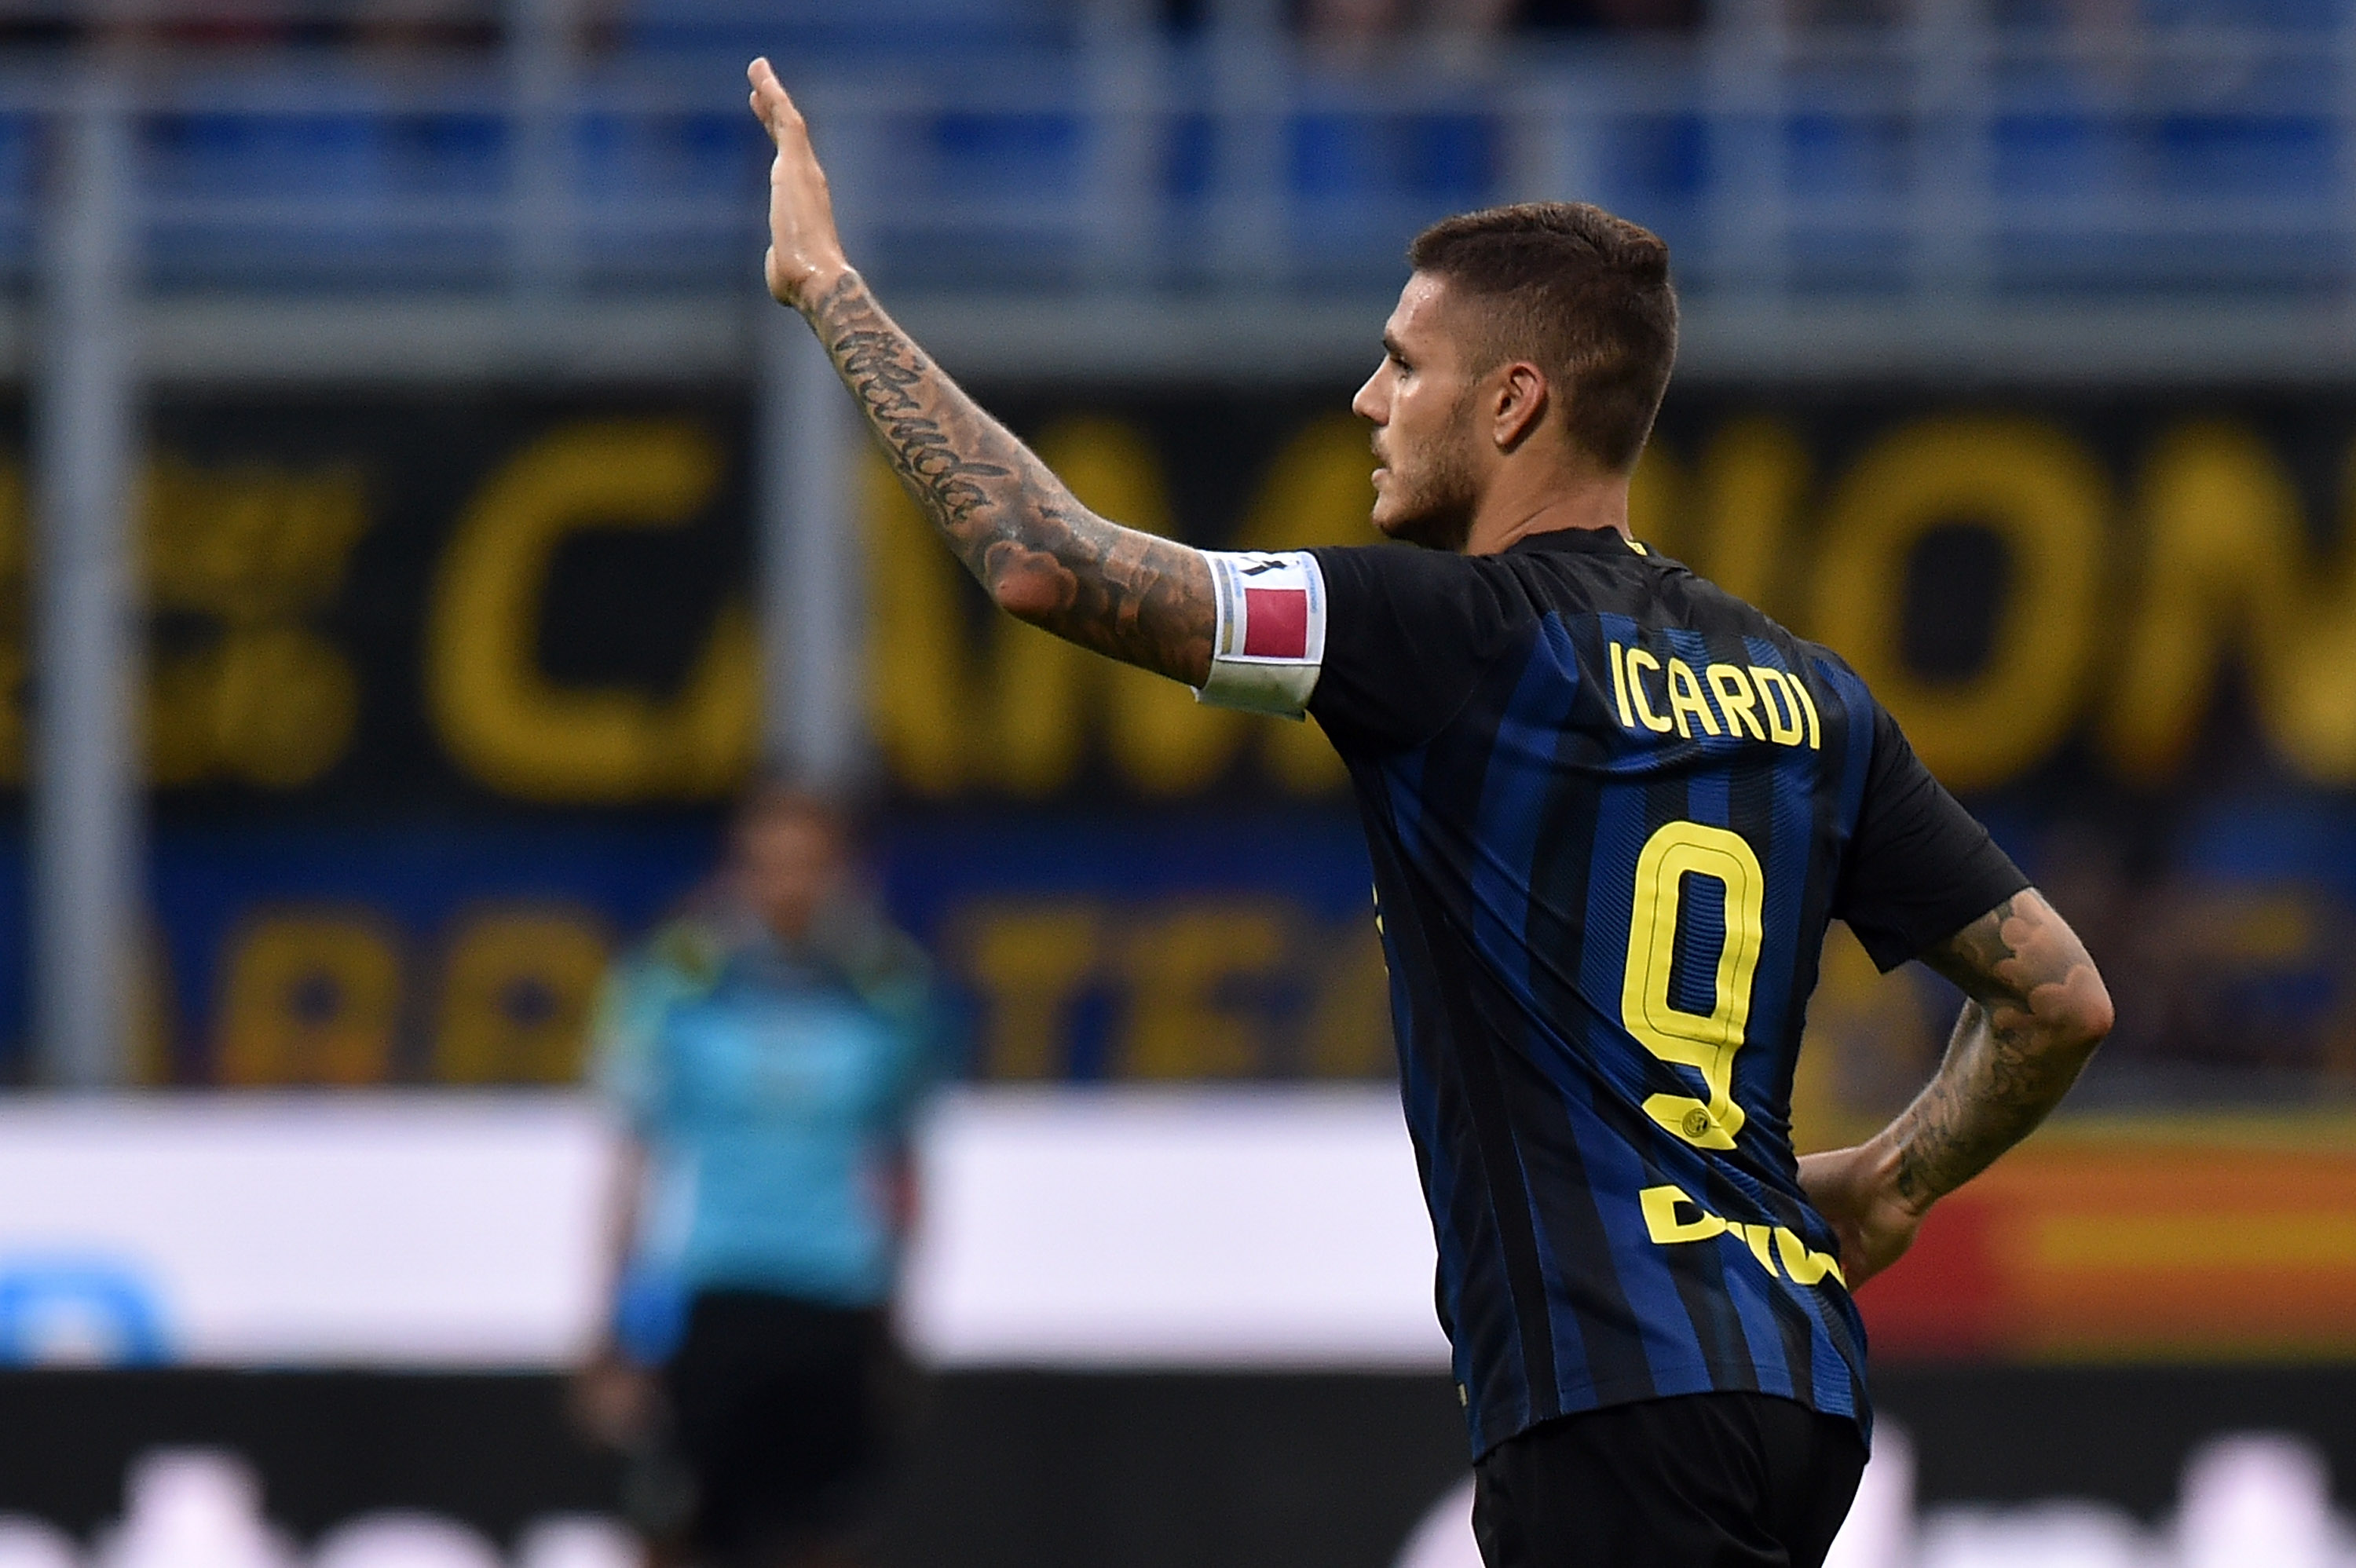 Inter's Icard-ependency is a major source of concern - Soccer News